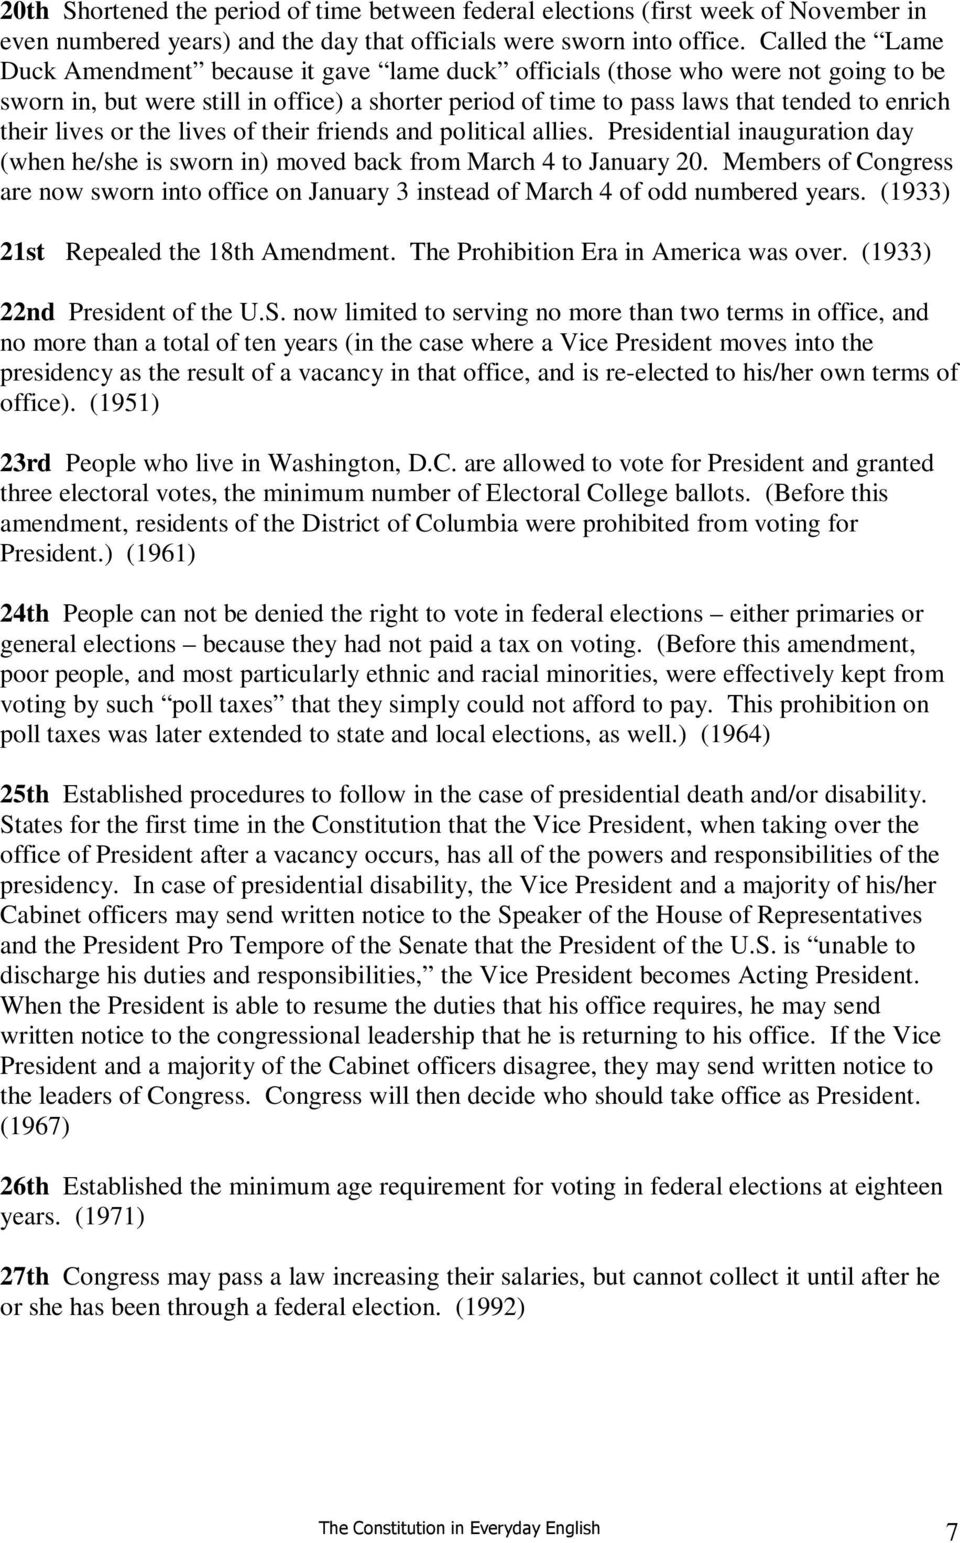 their lives or the lives of their friends and political allies. Presidential inauguration day (when he/she is sworn in) moved back from March 4 to January 20.